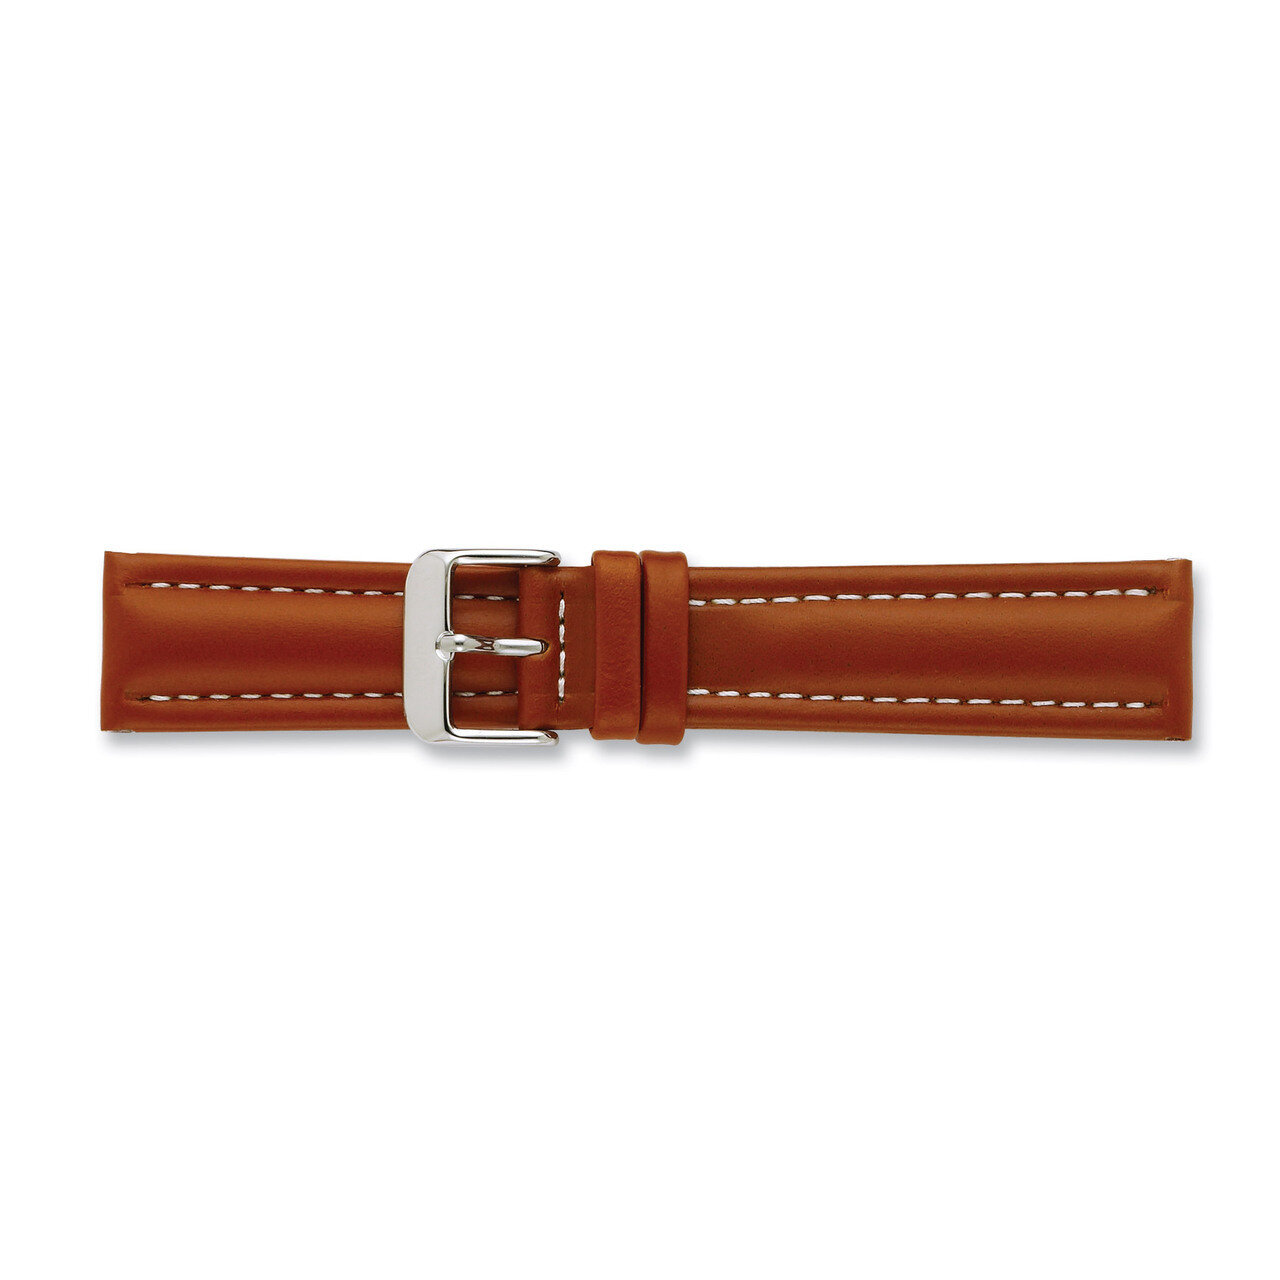 20mm Saddle Oil Tanned Leather Watch Band 7.5 Inch Silver-tone Buckle BAW194-20